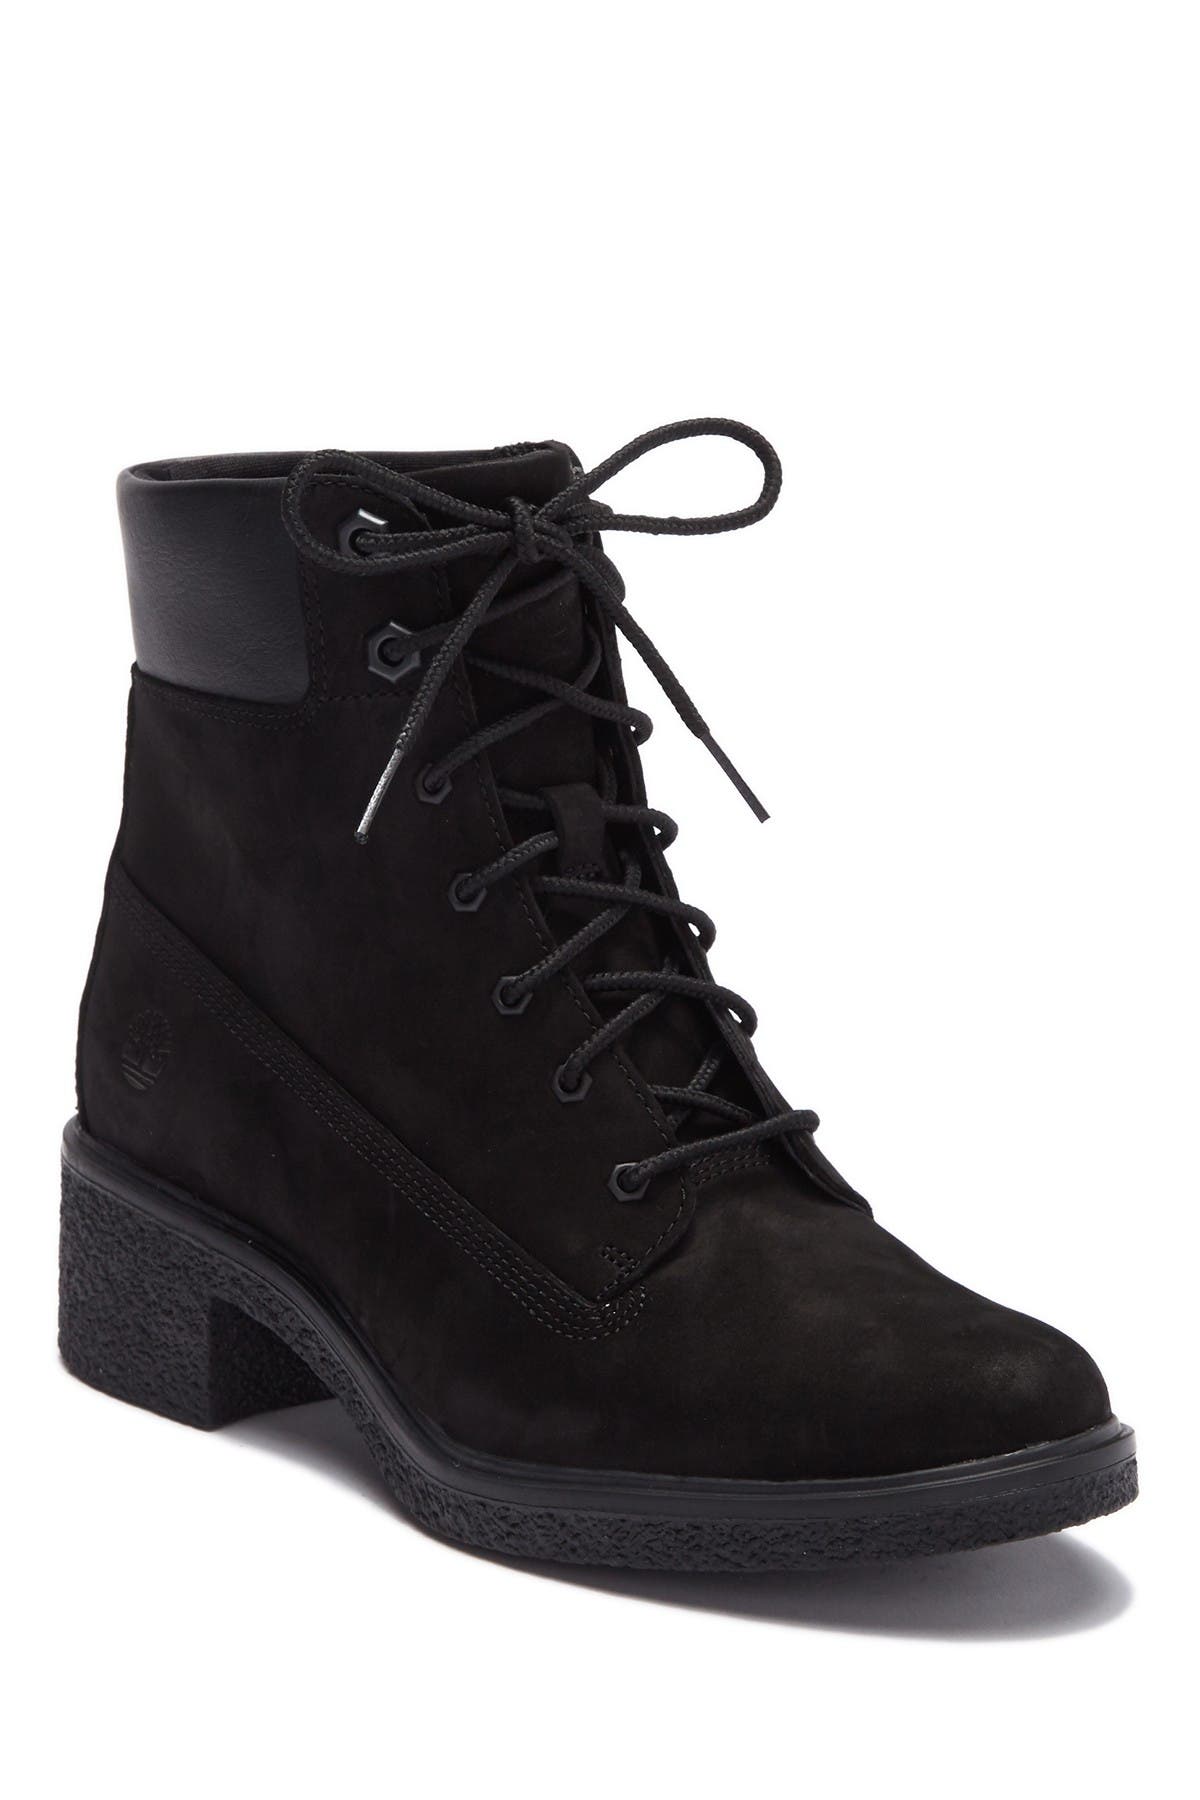 timberland lace up boots